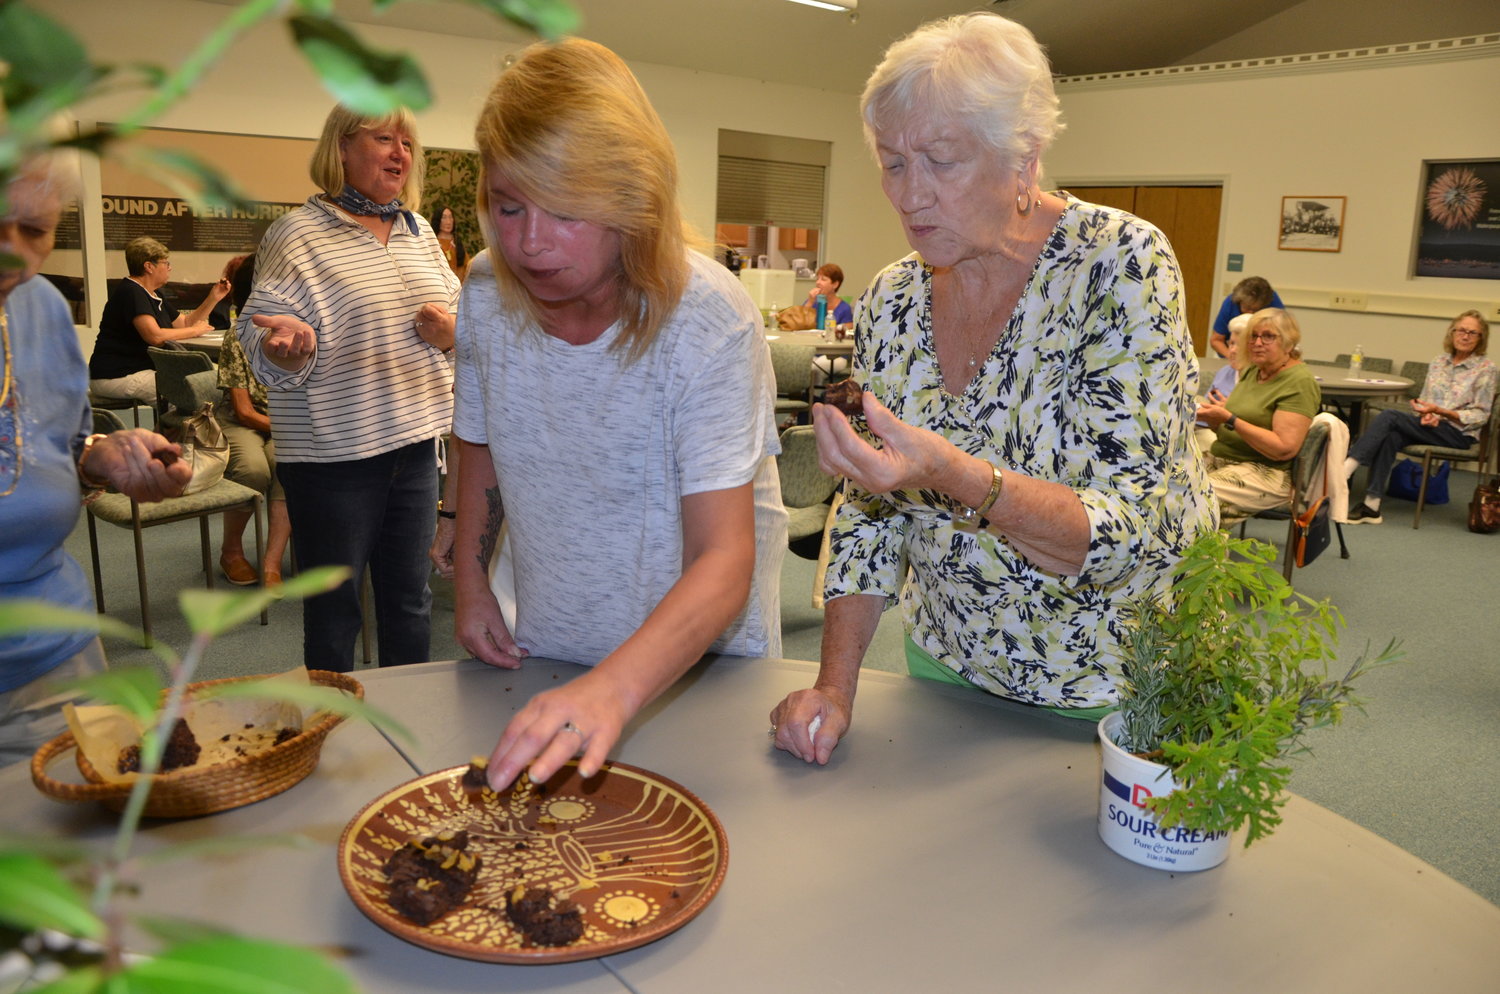 Members of the Country Gardeners Club tasted Marcia Dunsmore's chocolate zucchini bread and chocolate Afghan cookies.